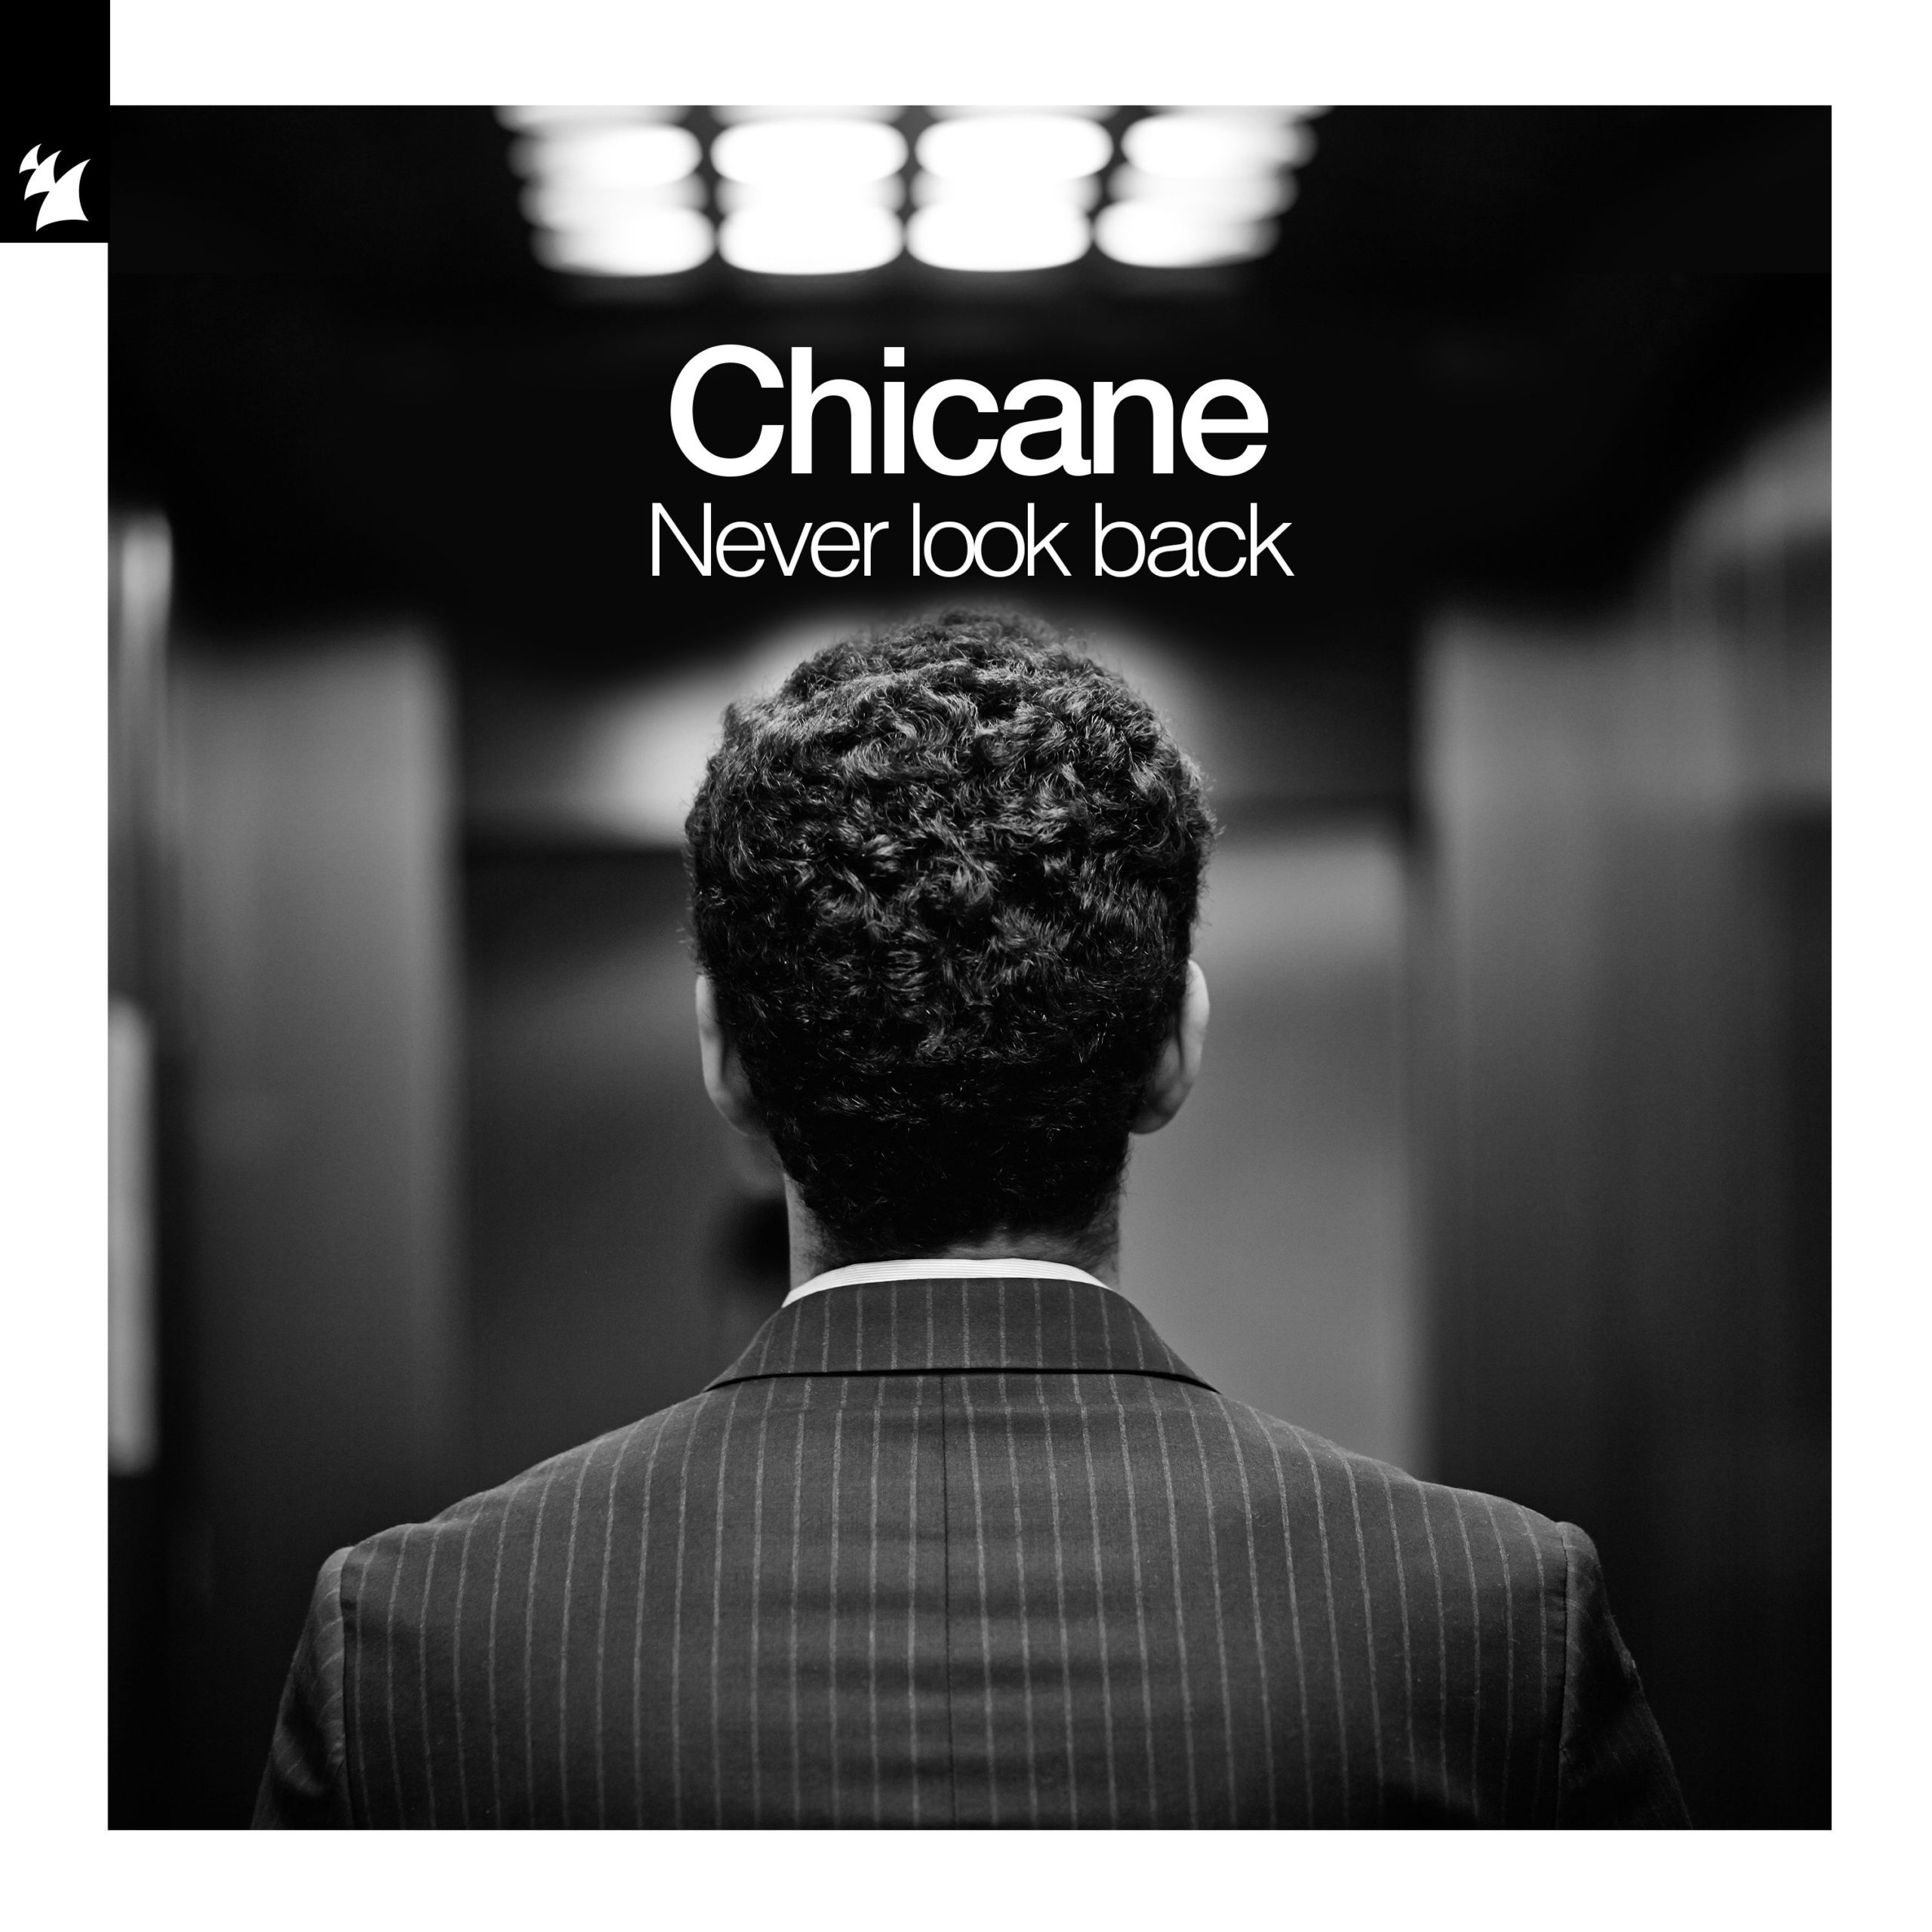 Chicane presents Never Look Back on Modena Records